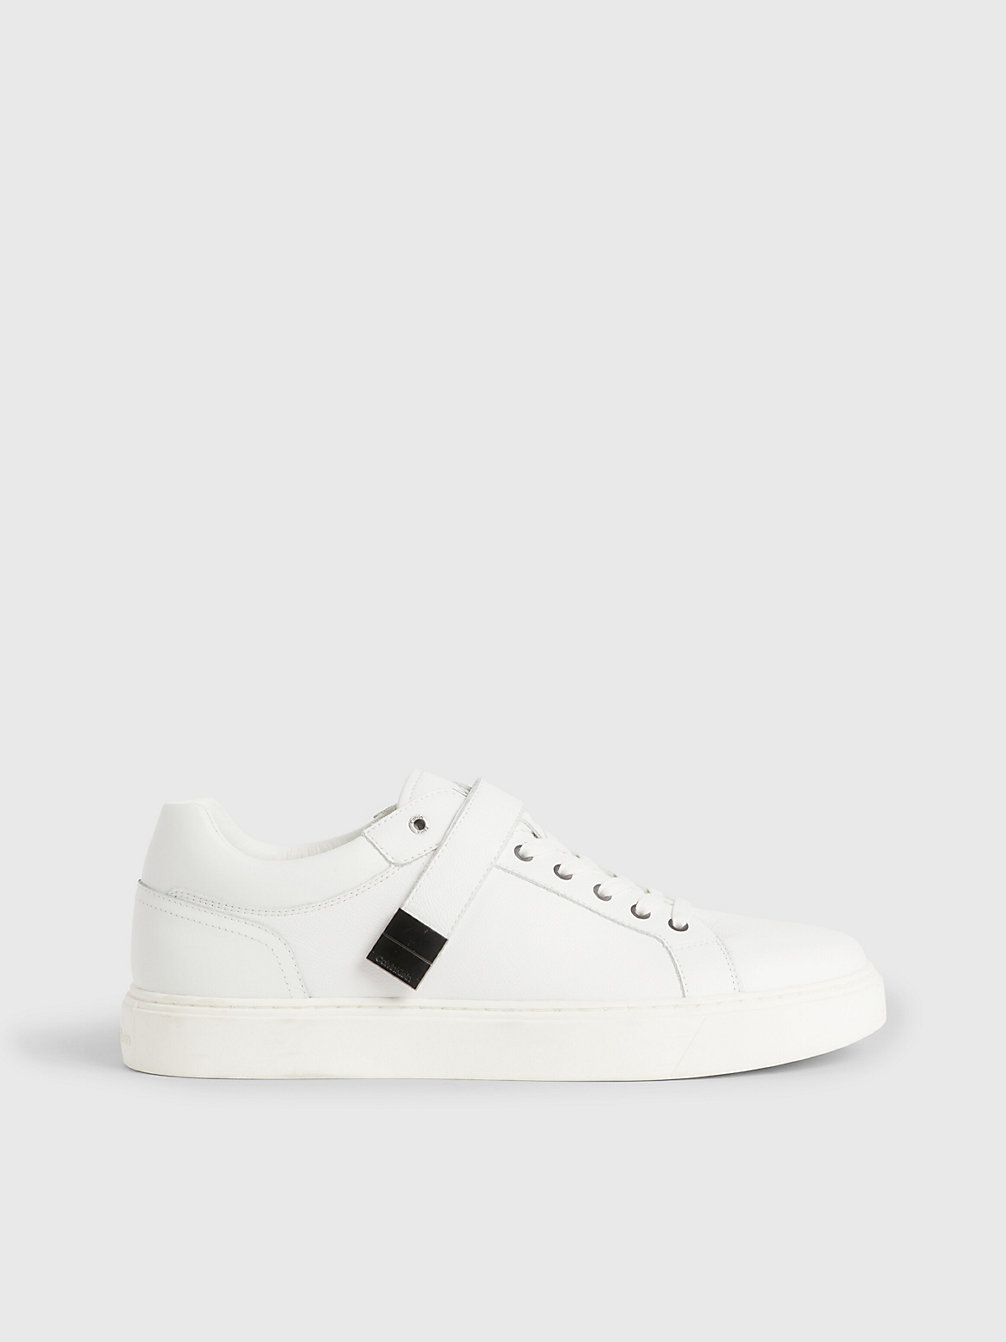 BRIGHT WHITE Leather Trainers undefined men Calvin Klein